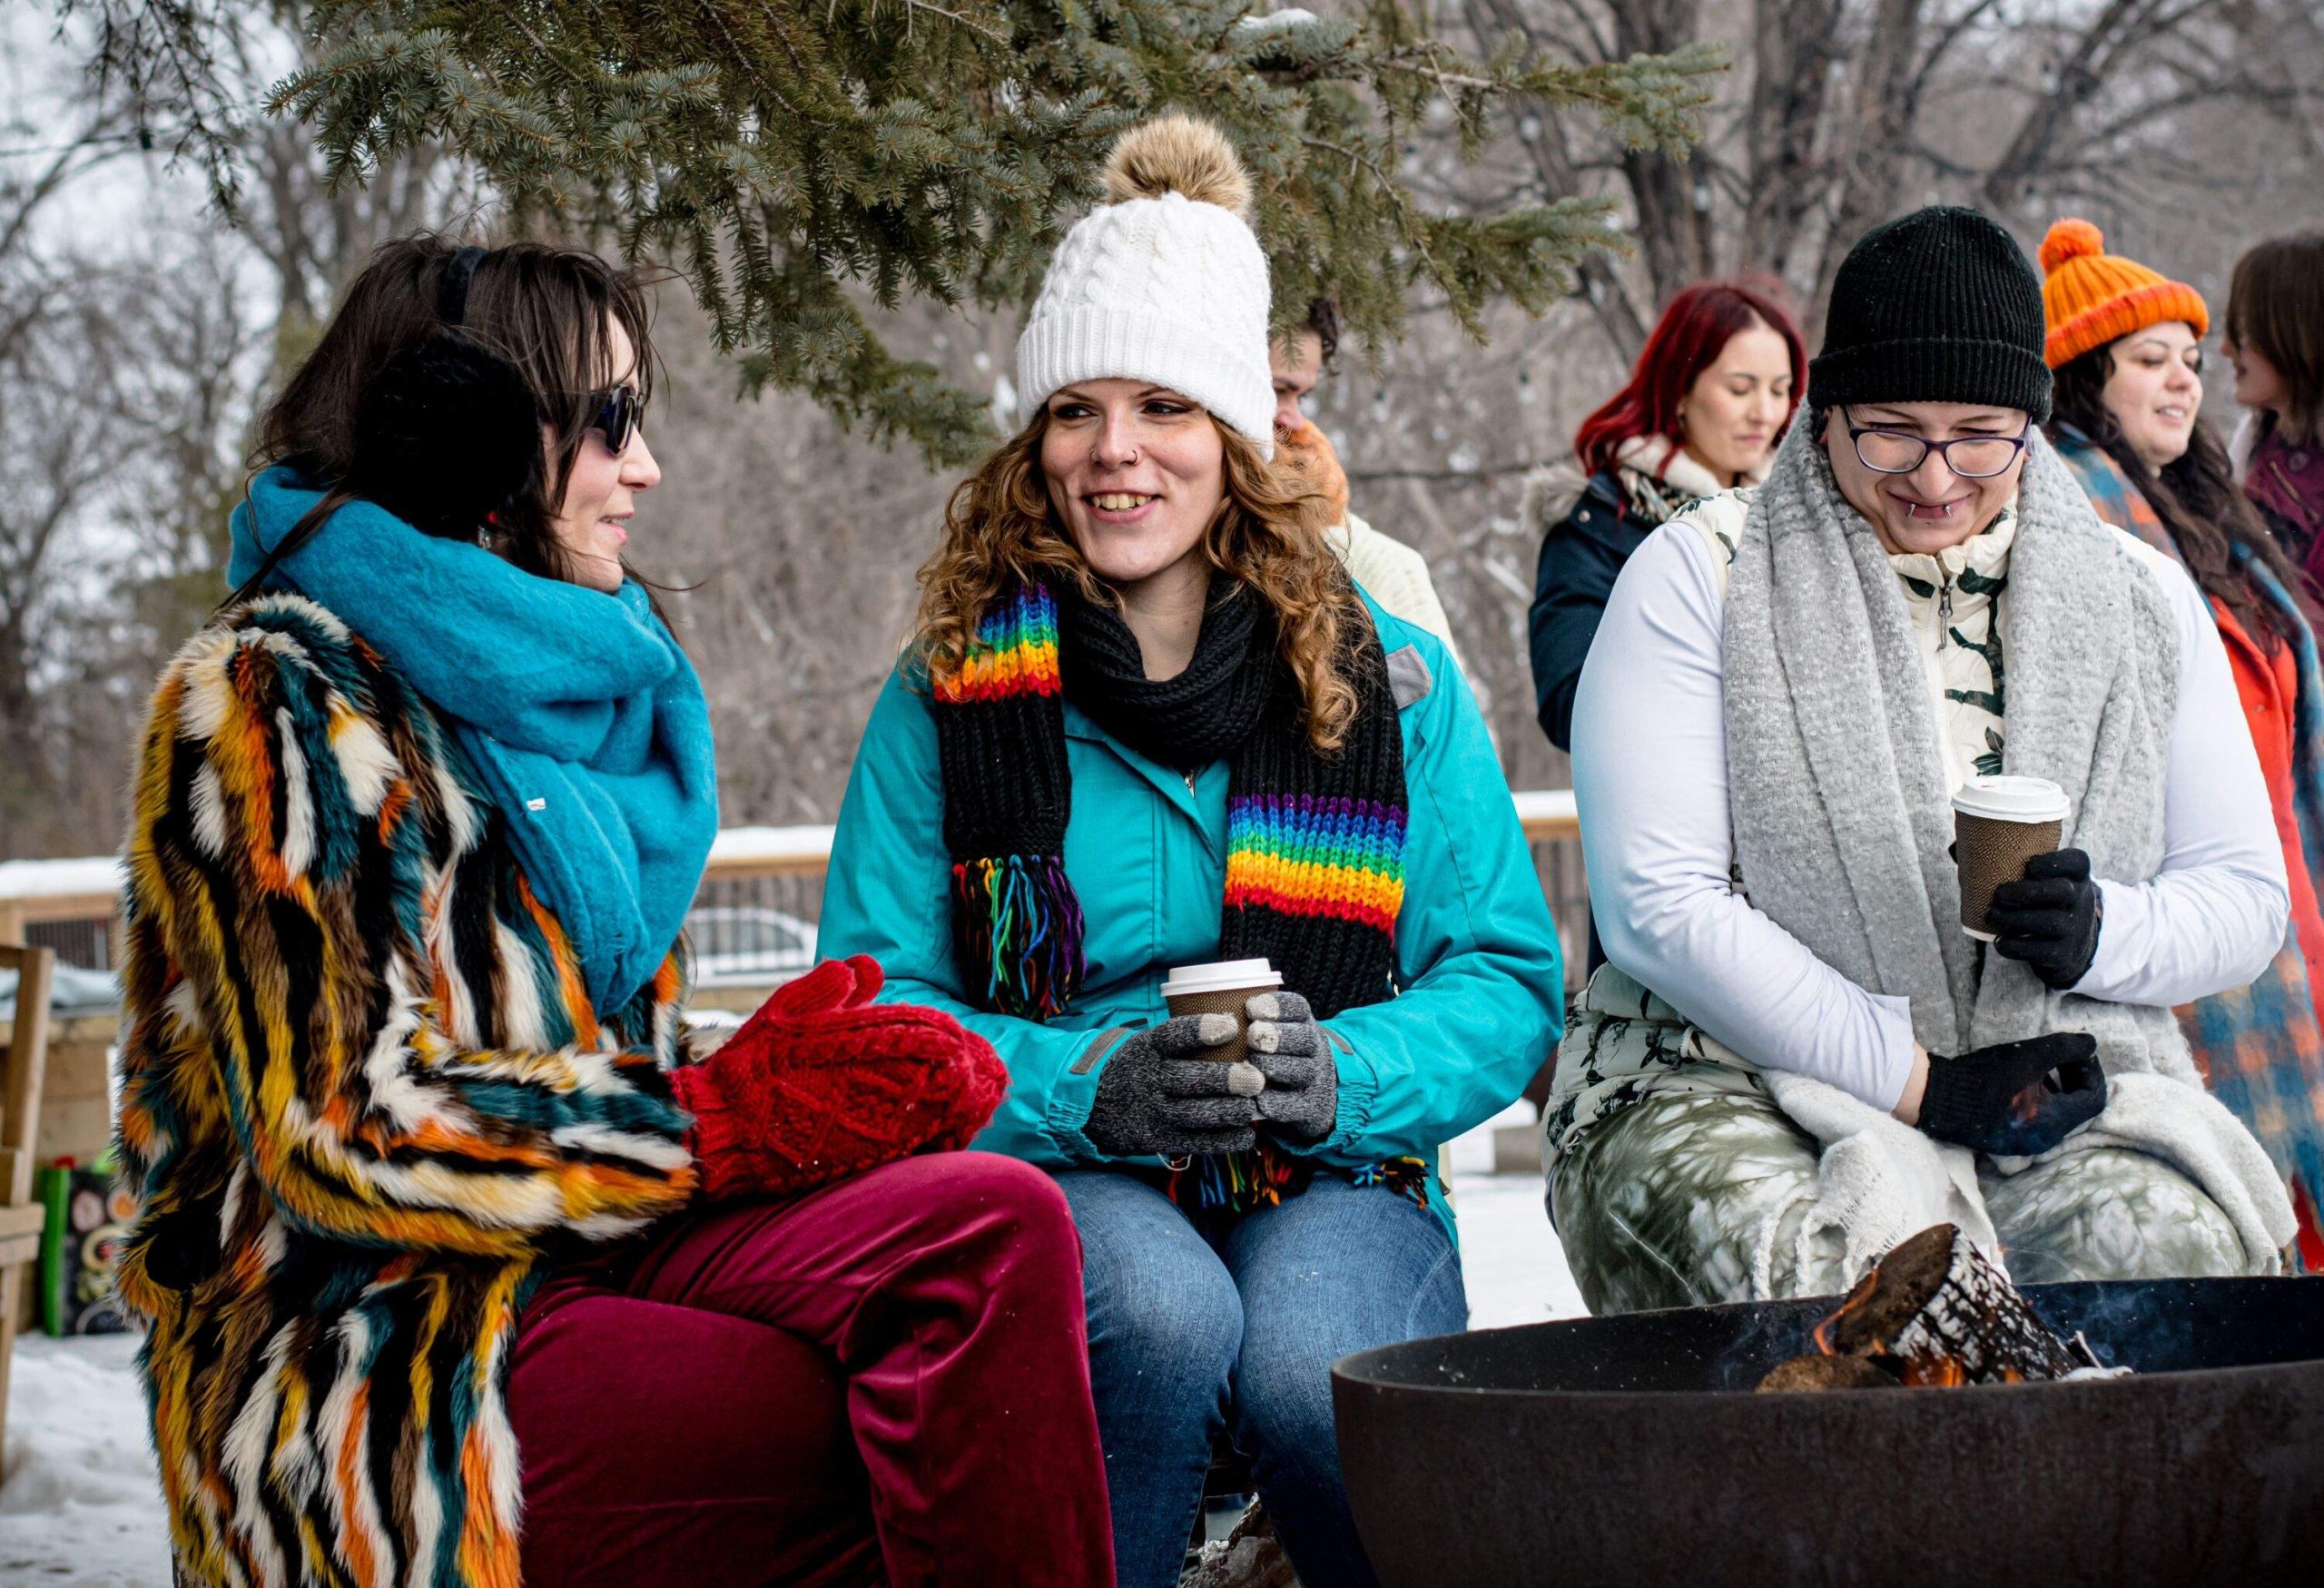 Amidst the winter chill, trans women and their nonbinary neurodivergent friend gather by the fireside, each holding a cup of cocoaâ€”a chosen family of unity and shared warmth in the season's embrace.